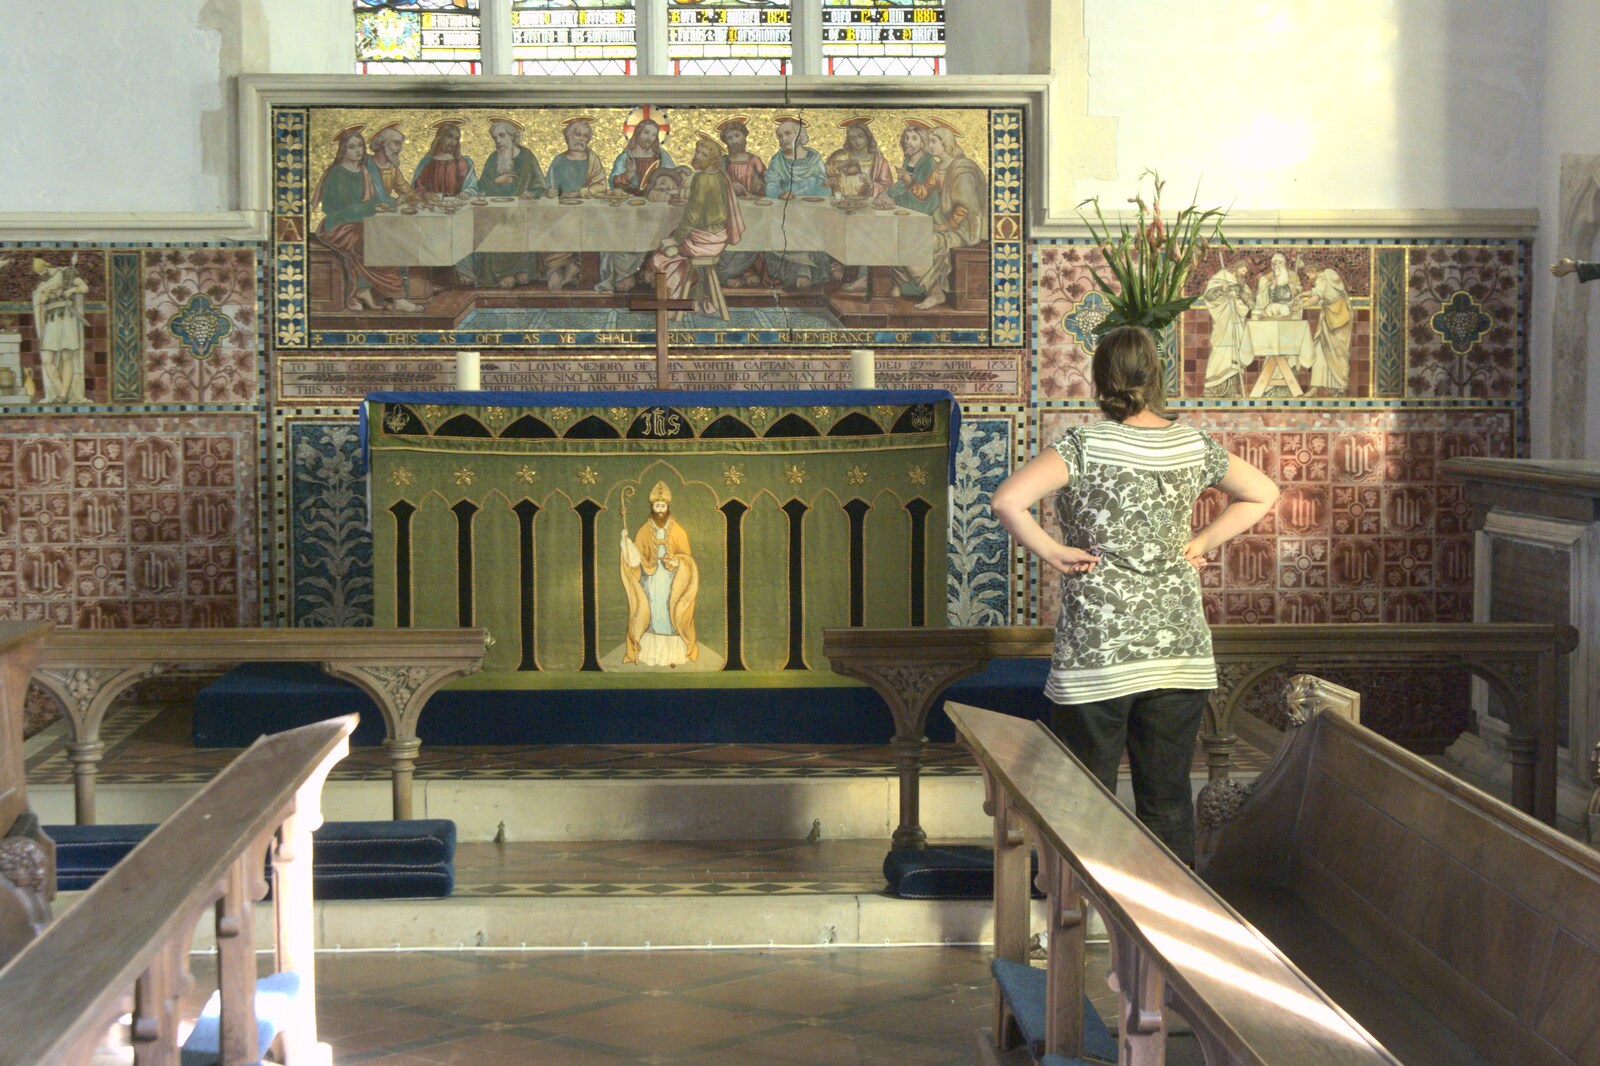 Isobel inspects the impressive Reredos from October Miscellany: A Ride to Oakley Church - 4th October 2009